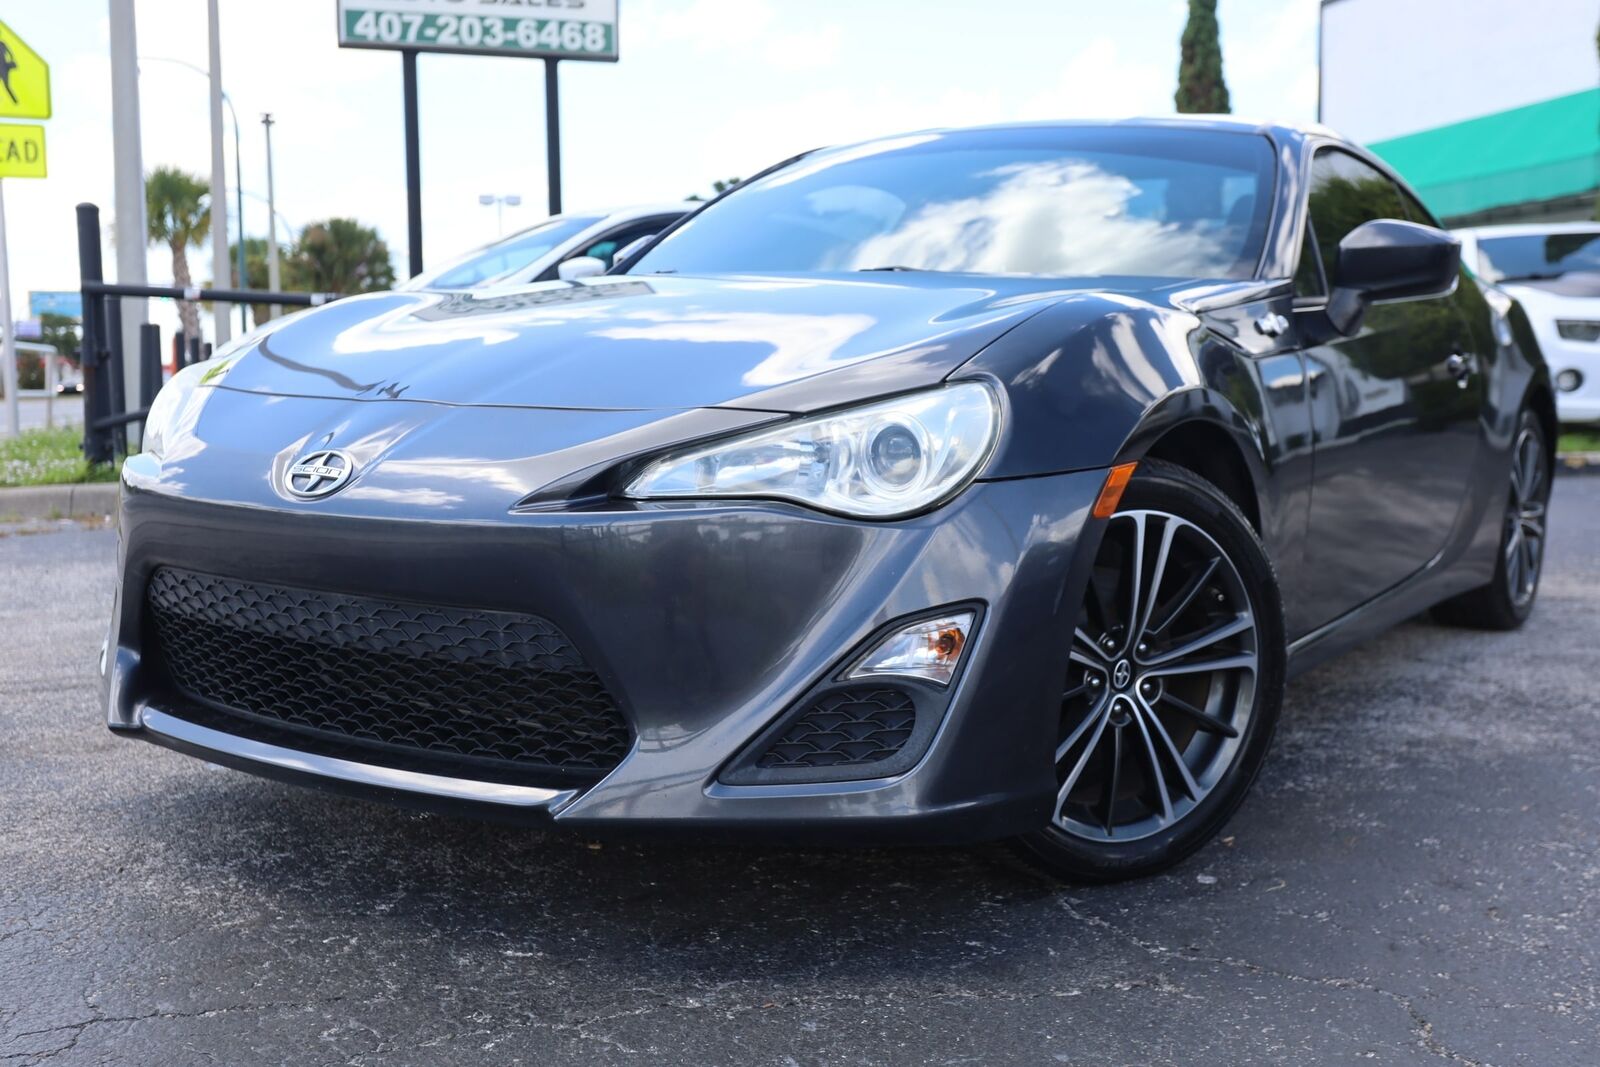 2013 Scion Fr-s  2013 Scion Fr-s, Gray With 77355 Miles Available Now!